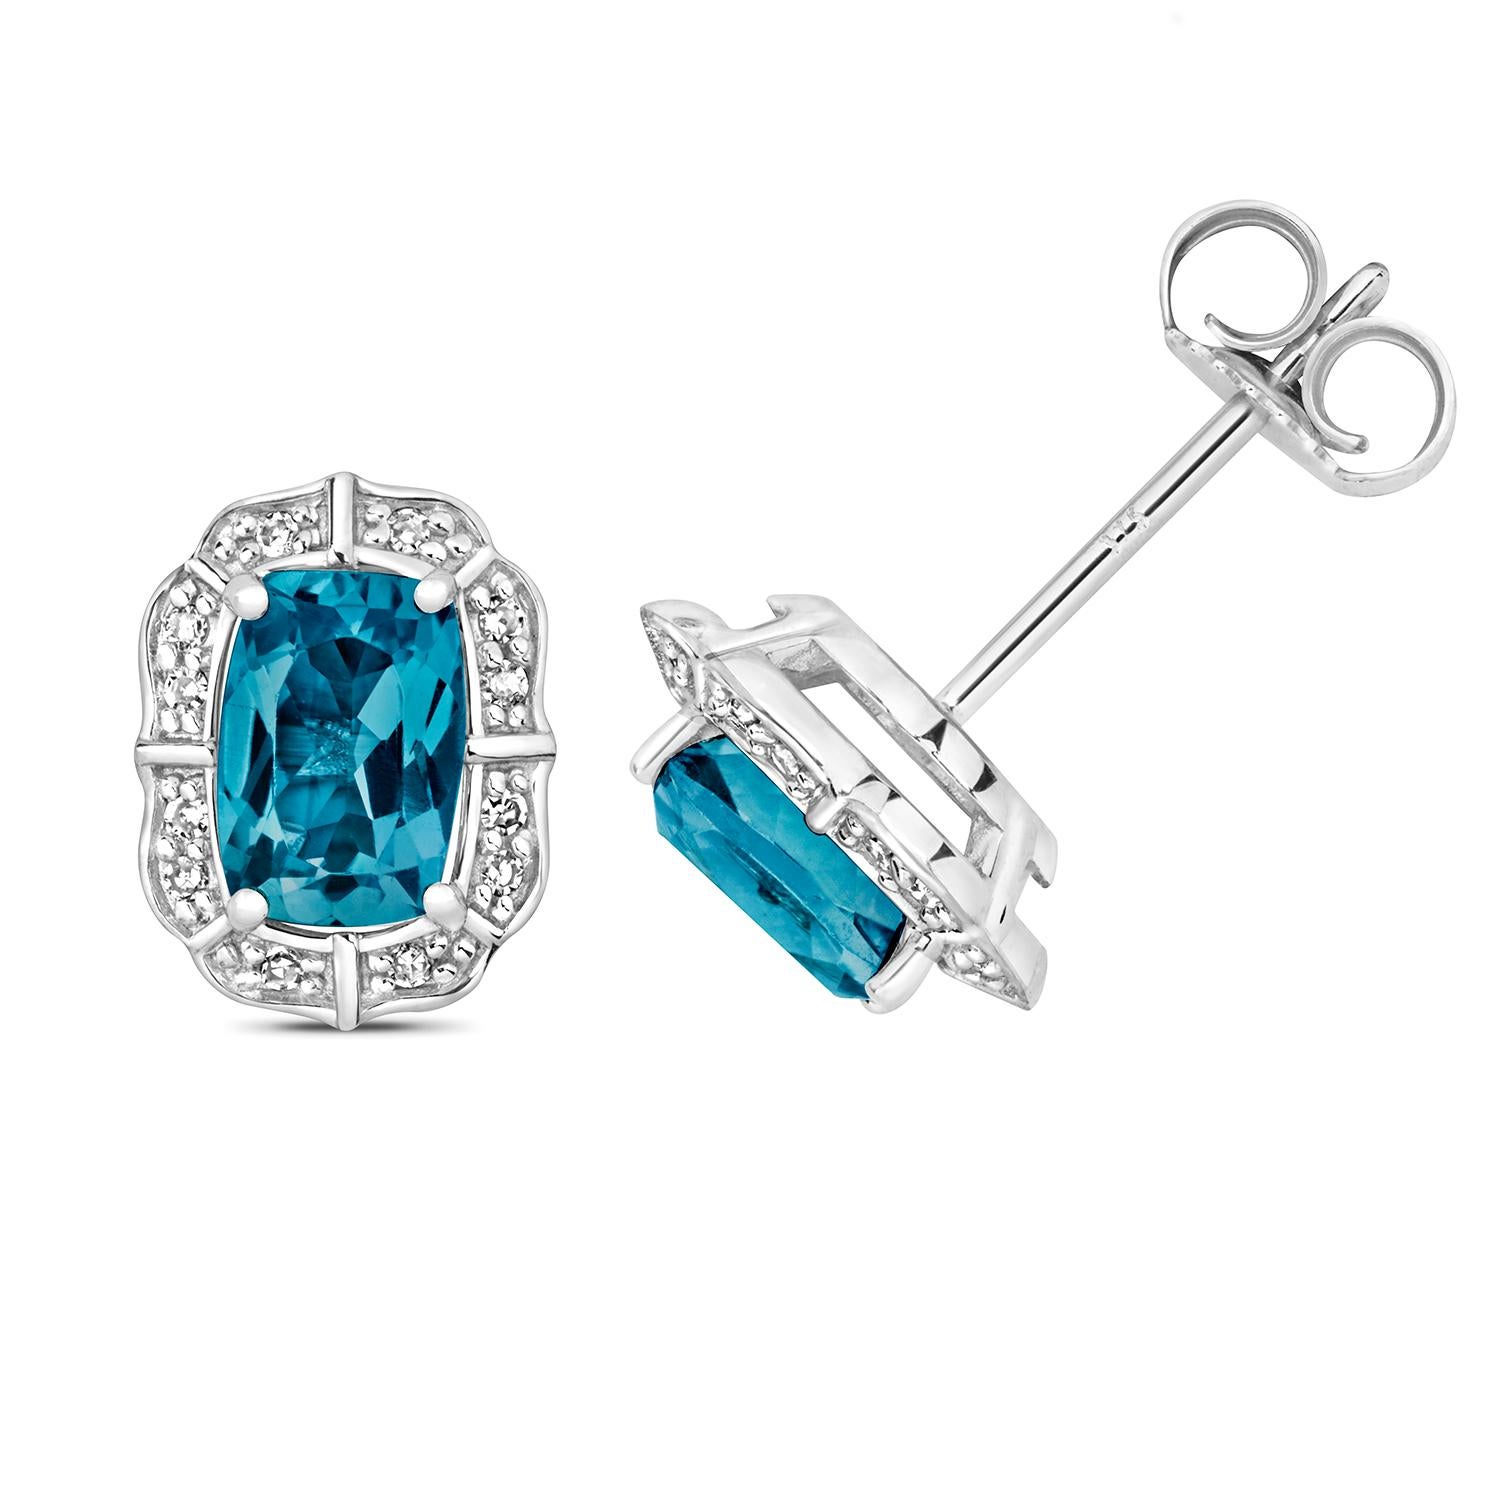 DIAMOND AND LONDON BLUE TOPAZ STUDS

9CT W/G 2SC/0.07CT 2LBT/6X4MM CU

Weight: 1.35g

Number Of Stones:2+24

Total Carates:1.490+0.070